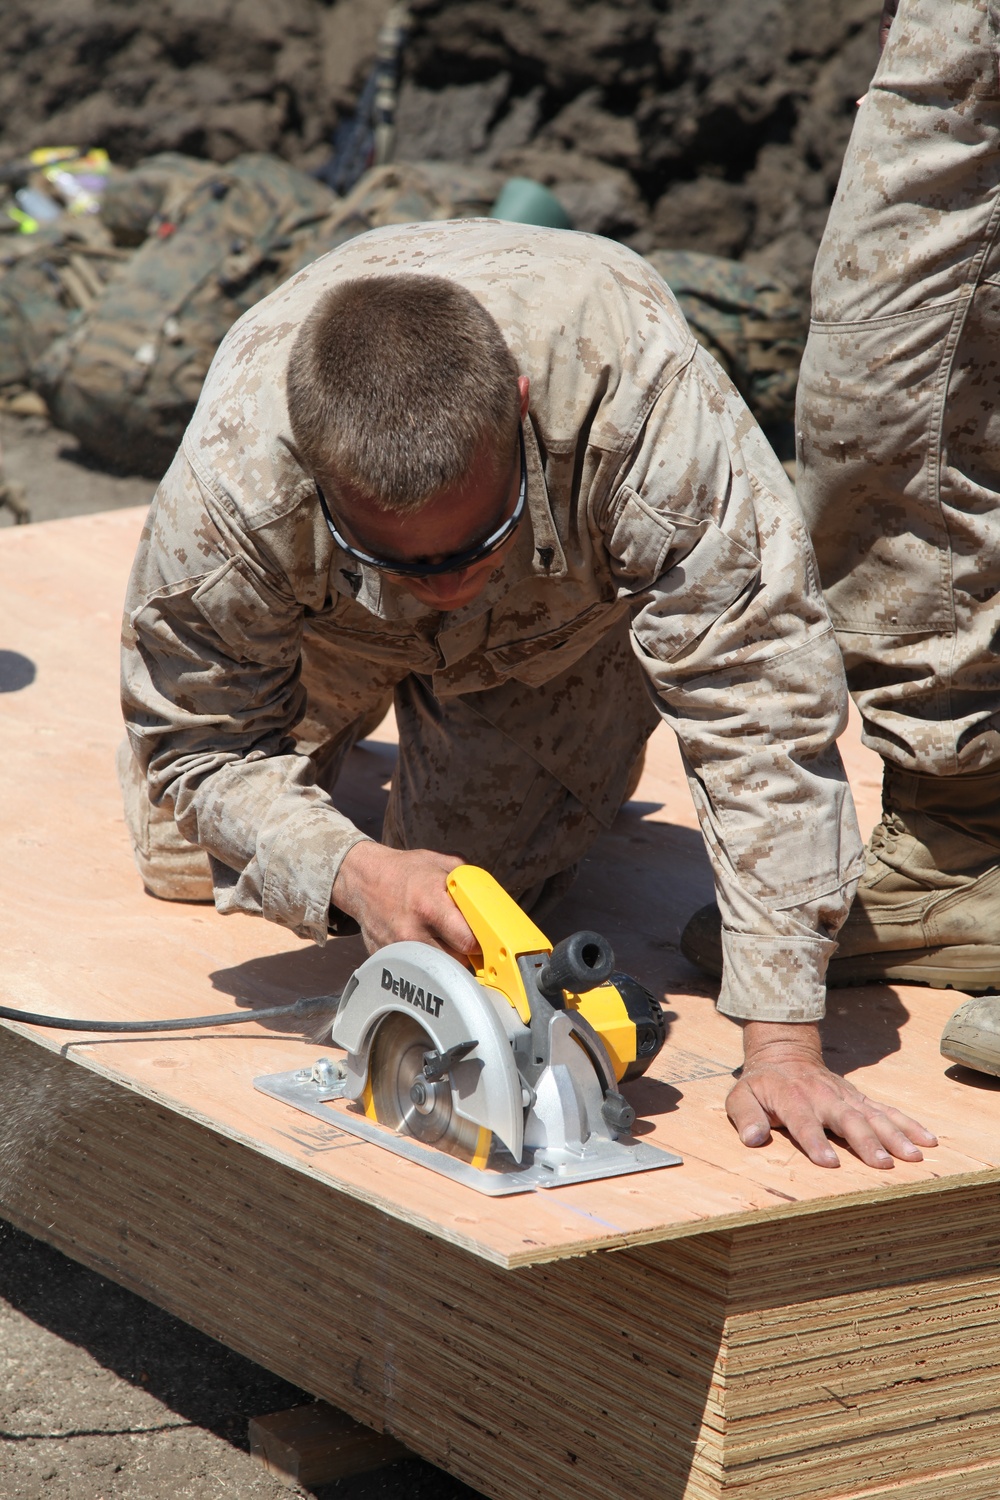 CLB-11 Marines construct hut from ground up